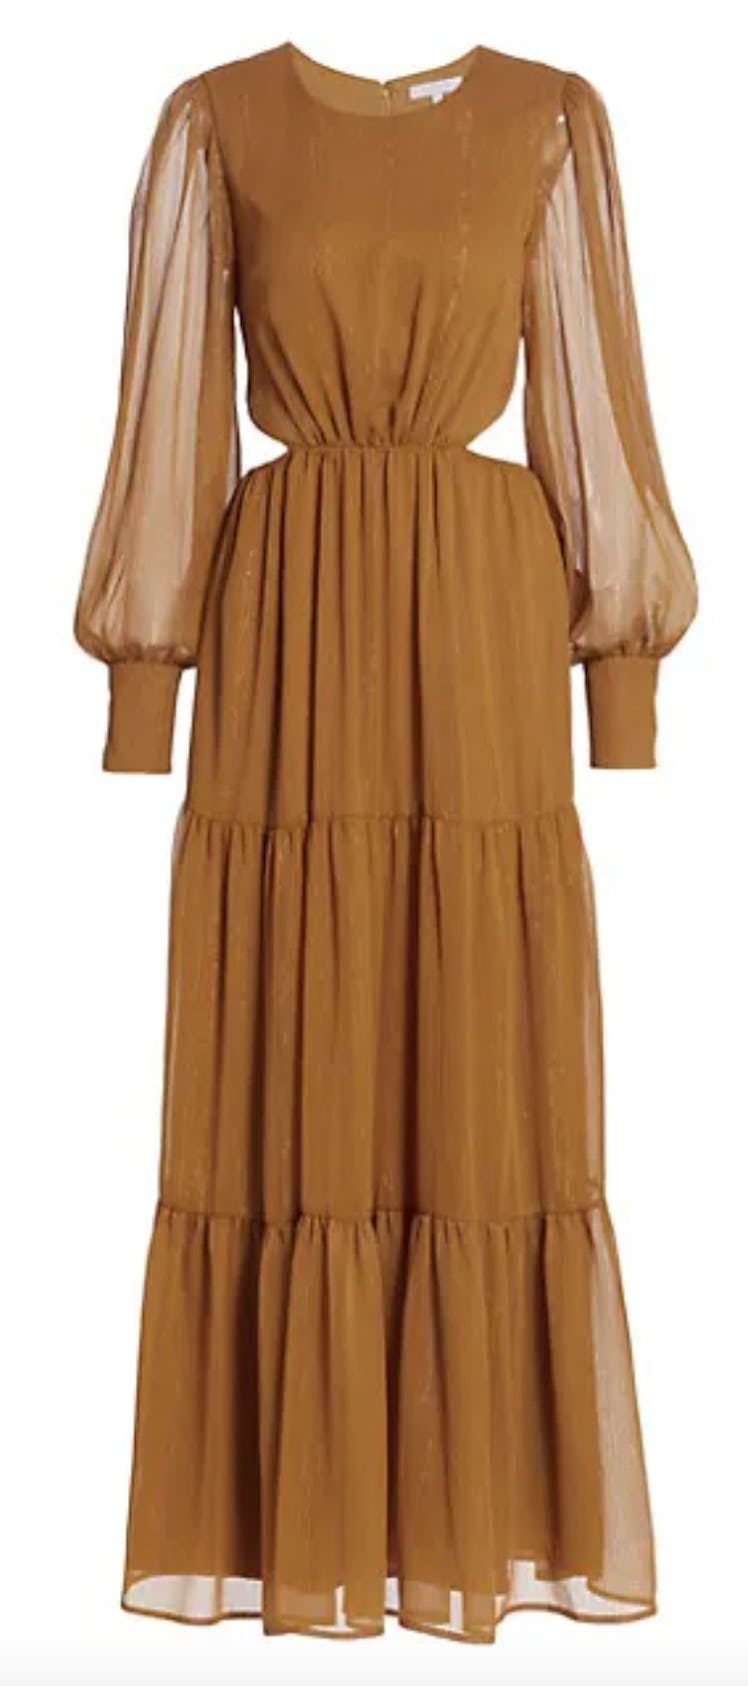 Wayf's Gina tiered cutout maxi dress in the color saffron. 